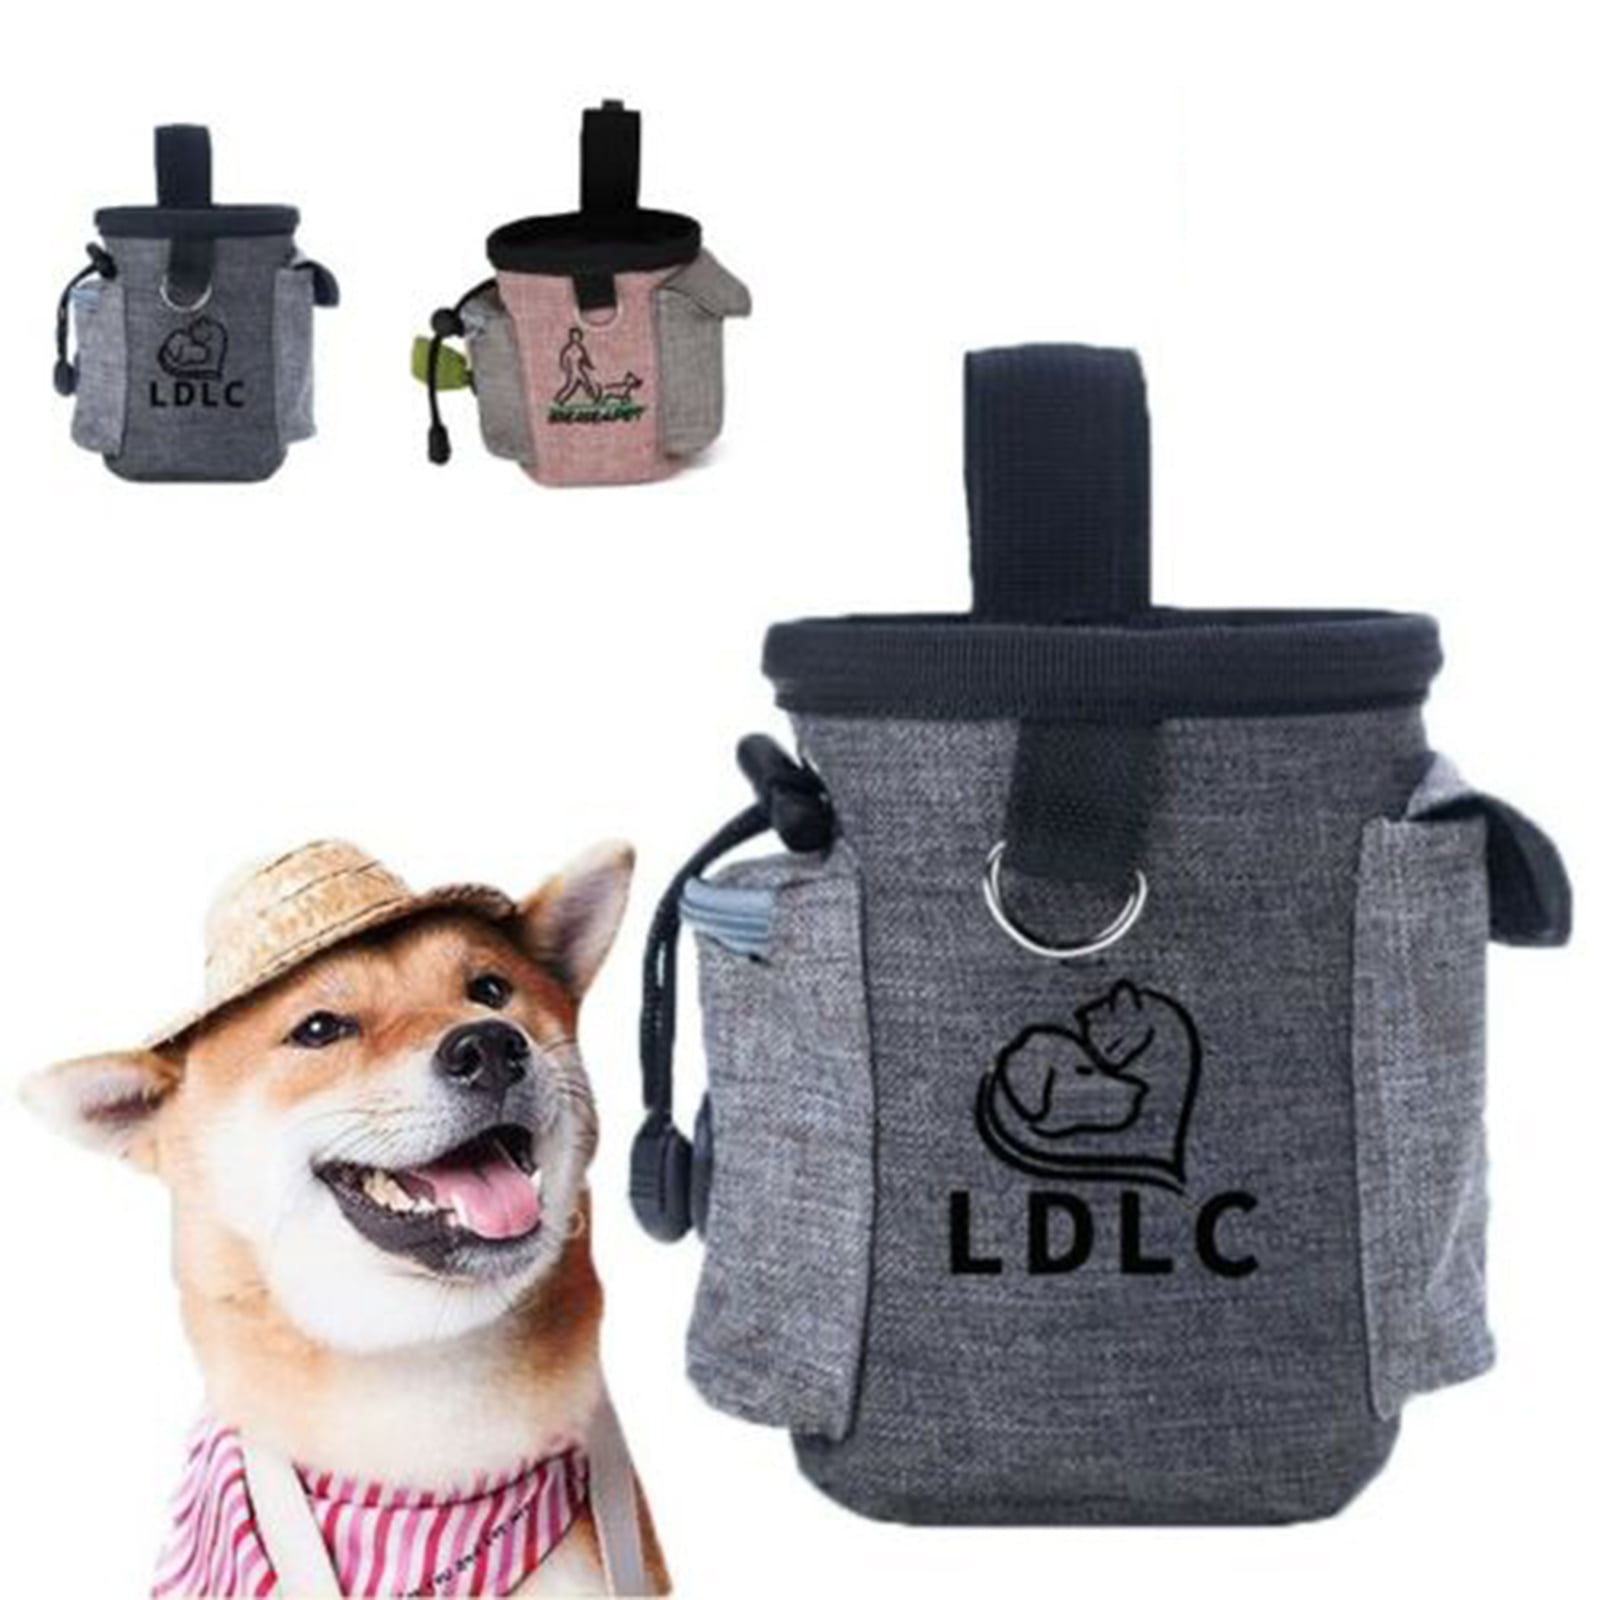 Dog Treat Training Pouch Waterproof Pet Snack Bag for Walking and Training Portable Dog Treat Bag with Clip & Drawstring